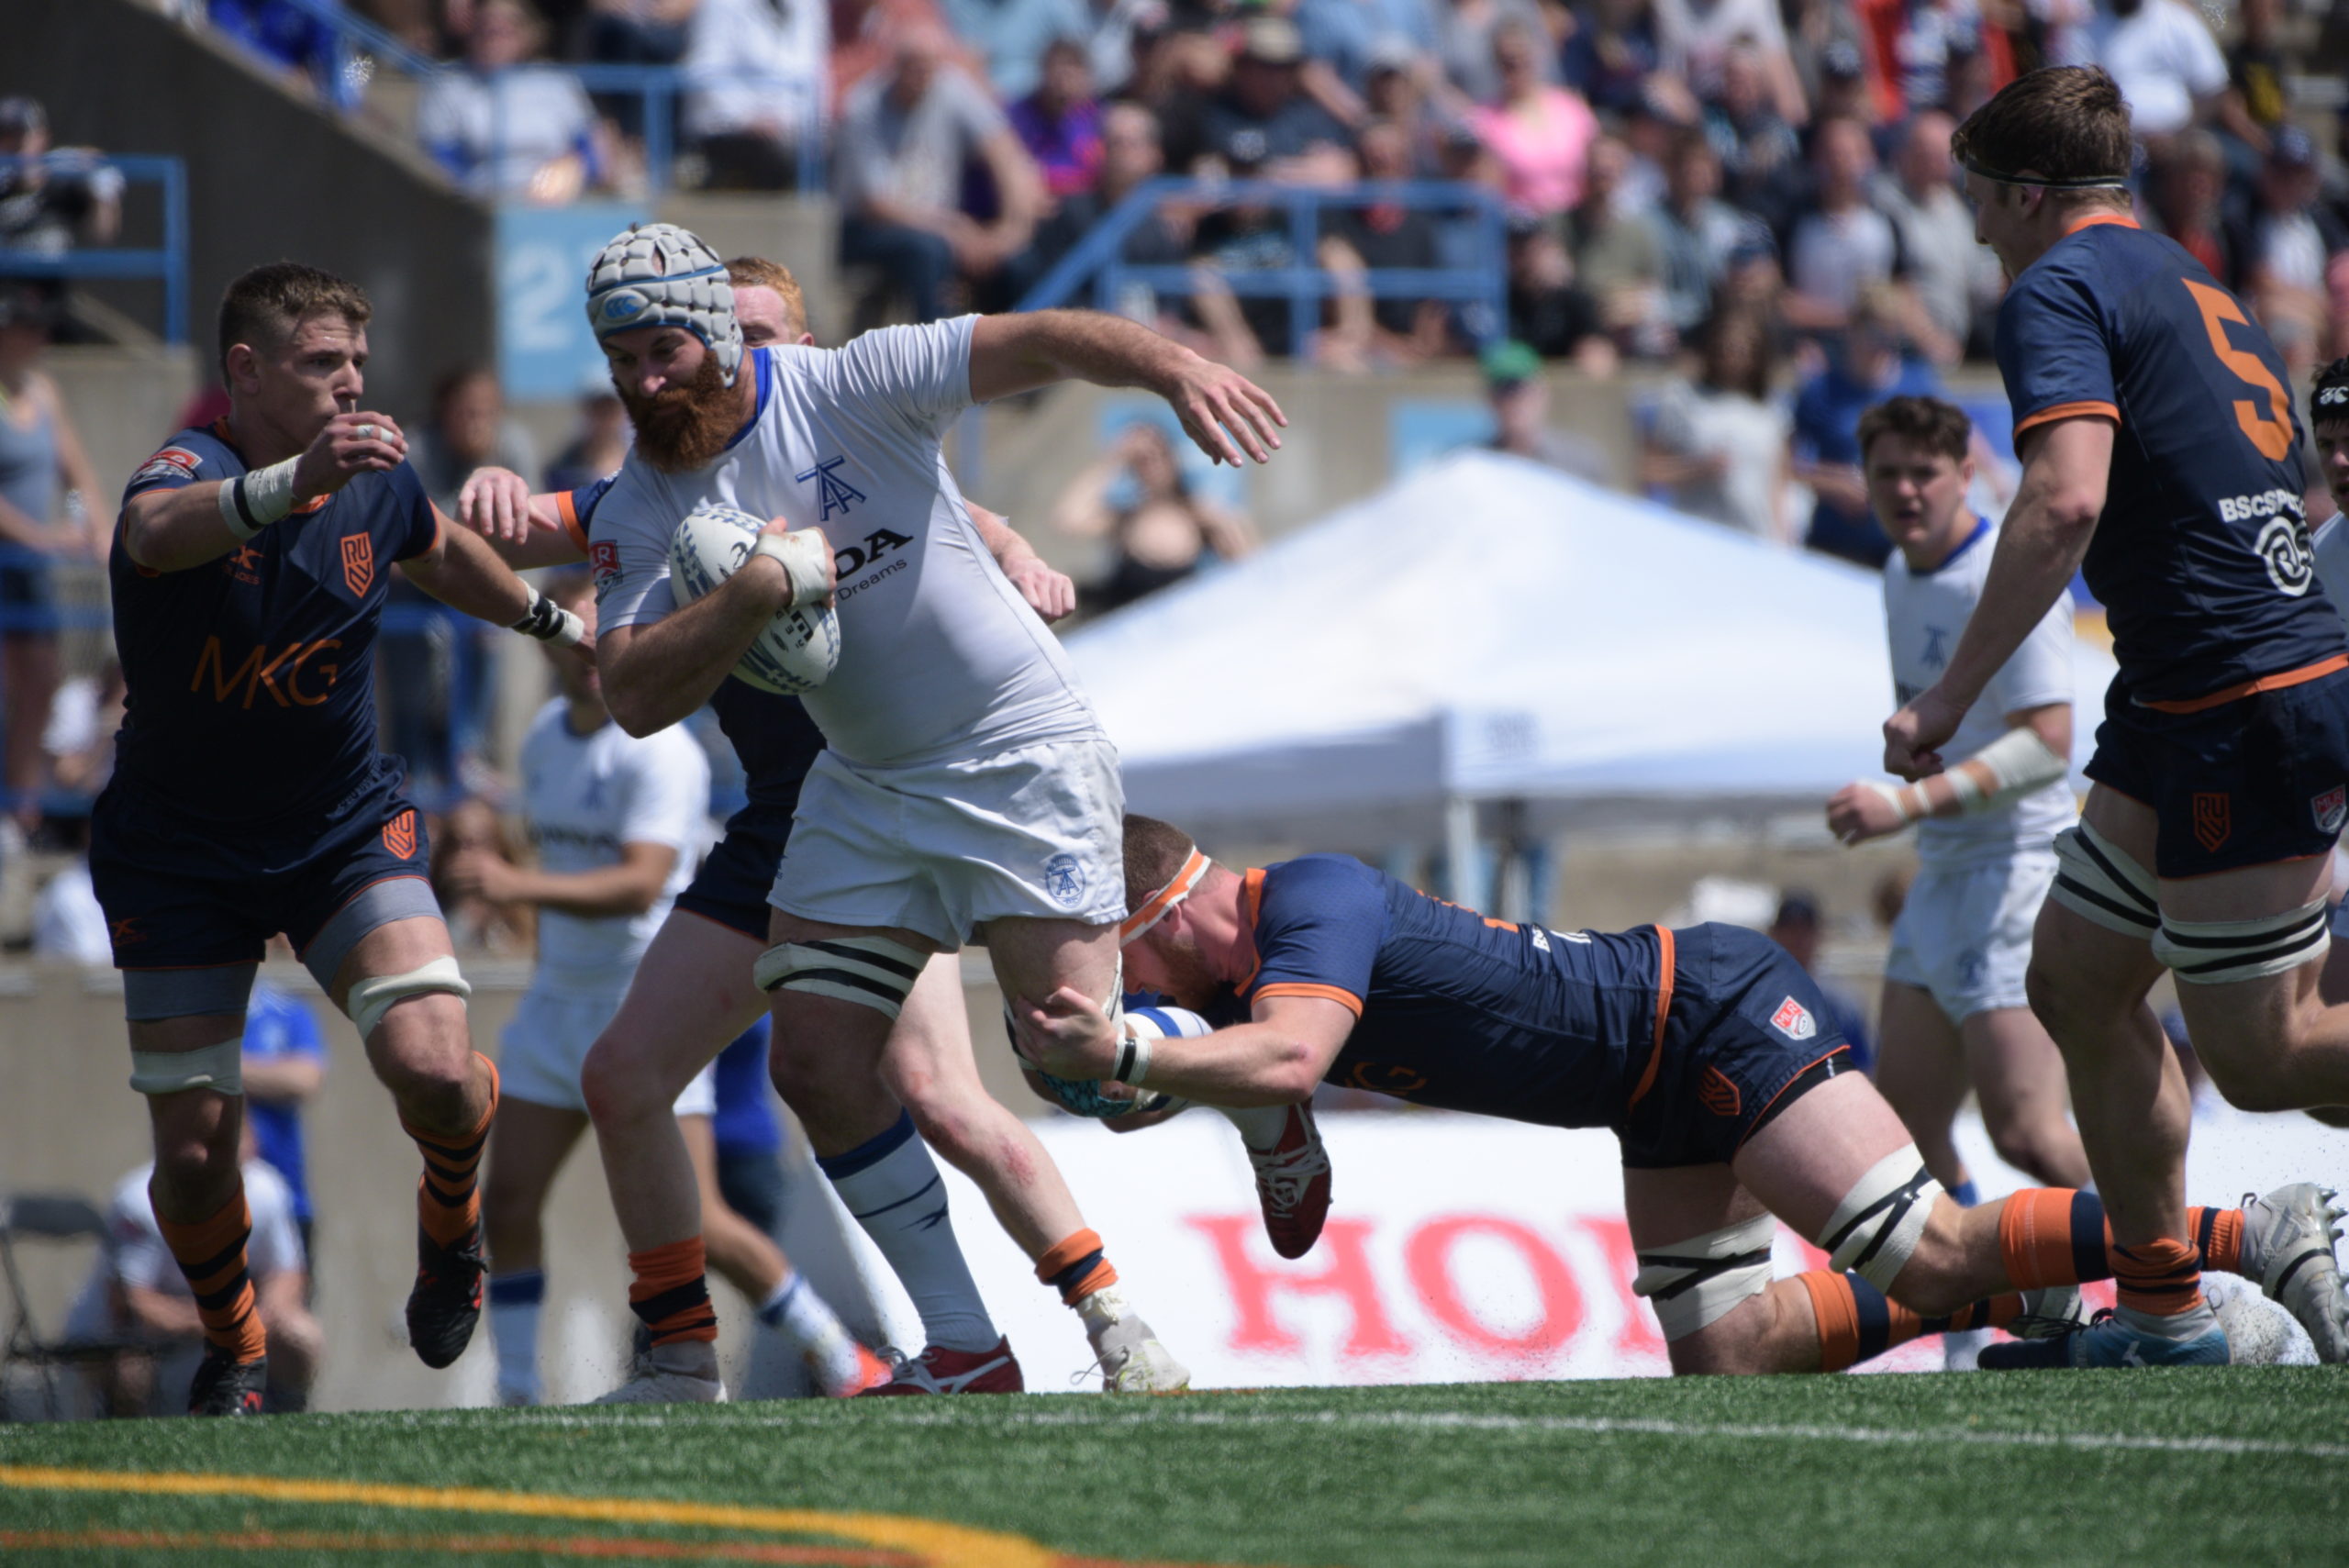 Toronto Arrows Announce the Return of Sheppard & Sheridan, Signing of Higgins